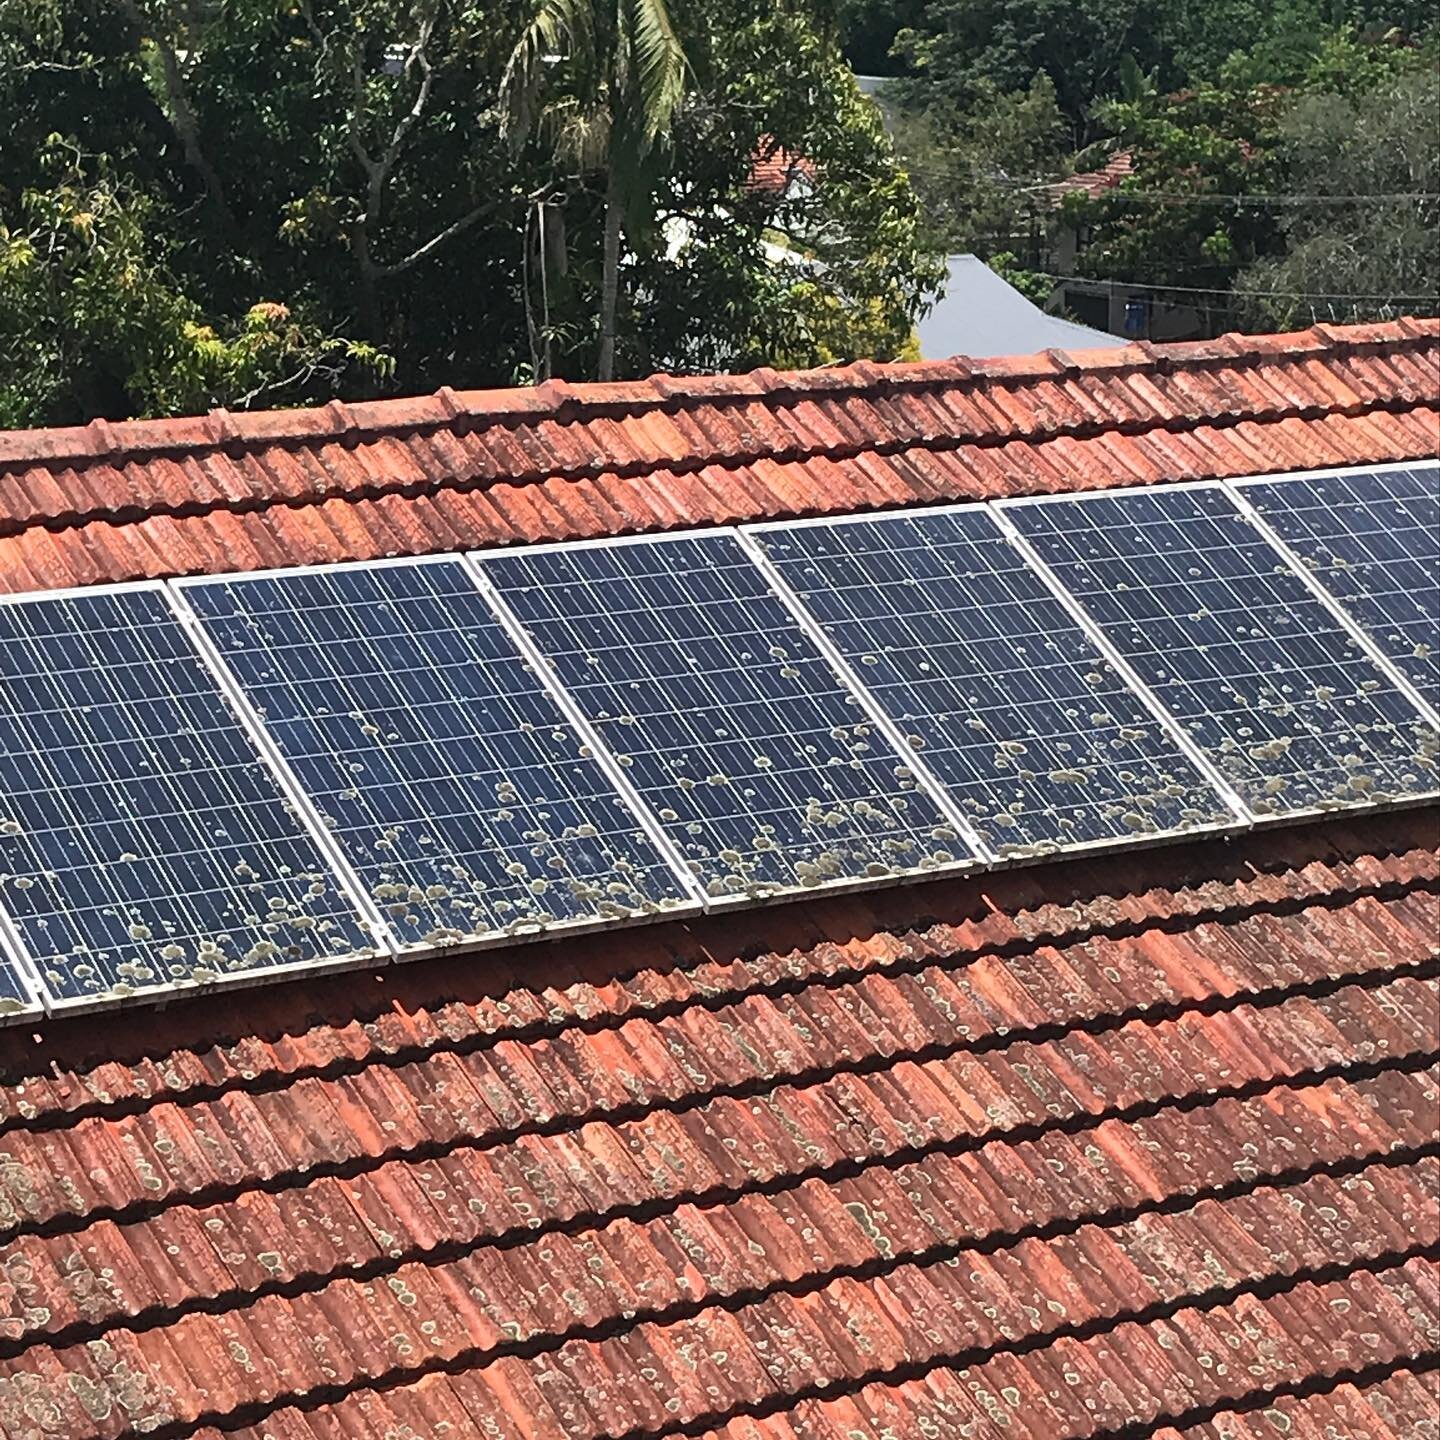 Did your realise, the cleaner your solar panels are the more efficiently they will work ? I have noticed an immediate increase in production of 15 % increased output after cleaning a set of dirty solar panels. The panels in this picture would be losi